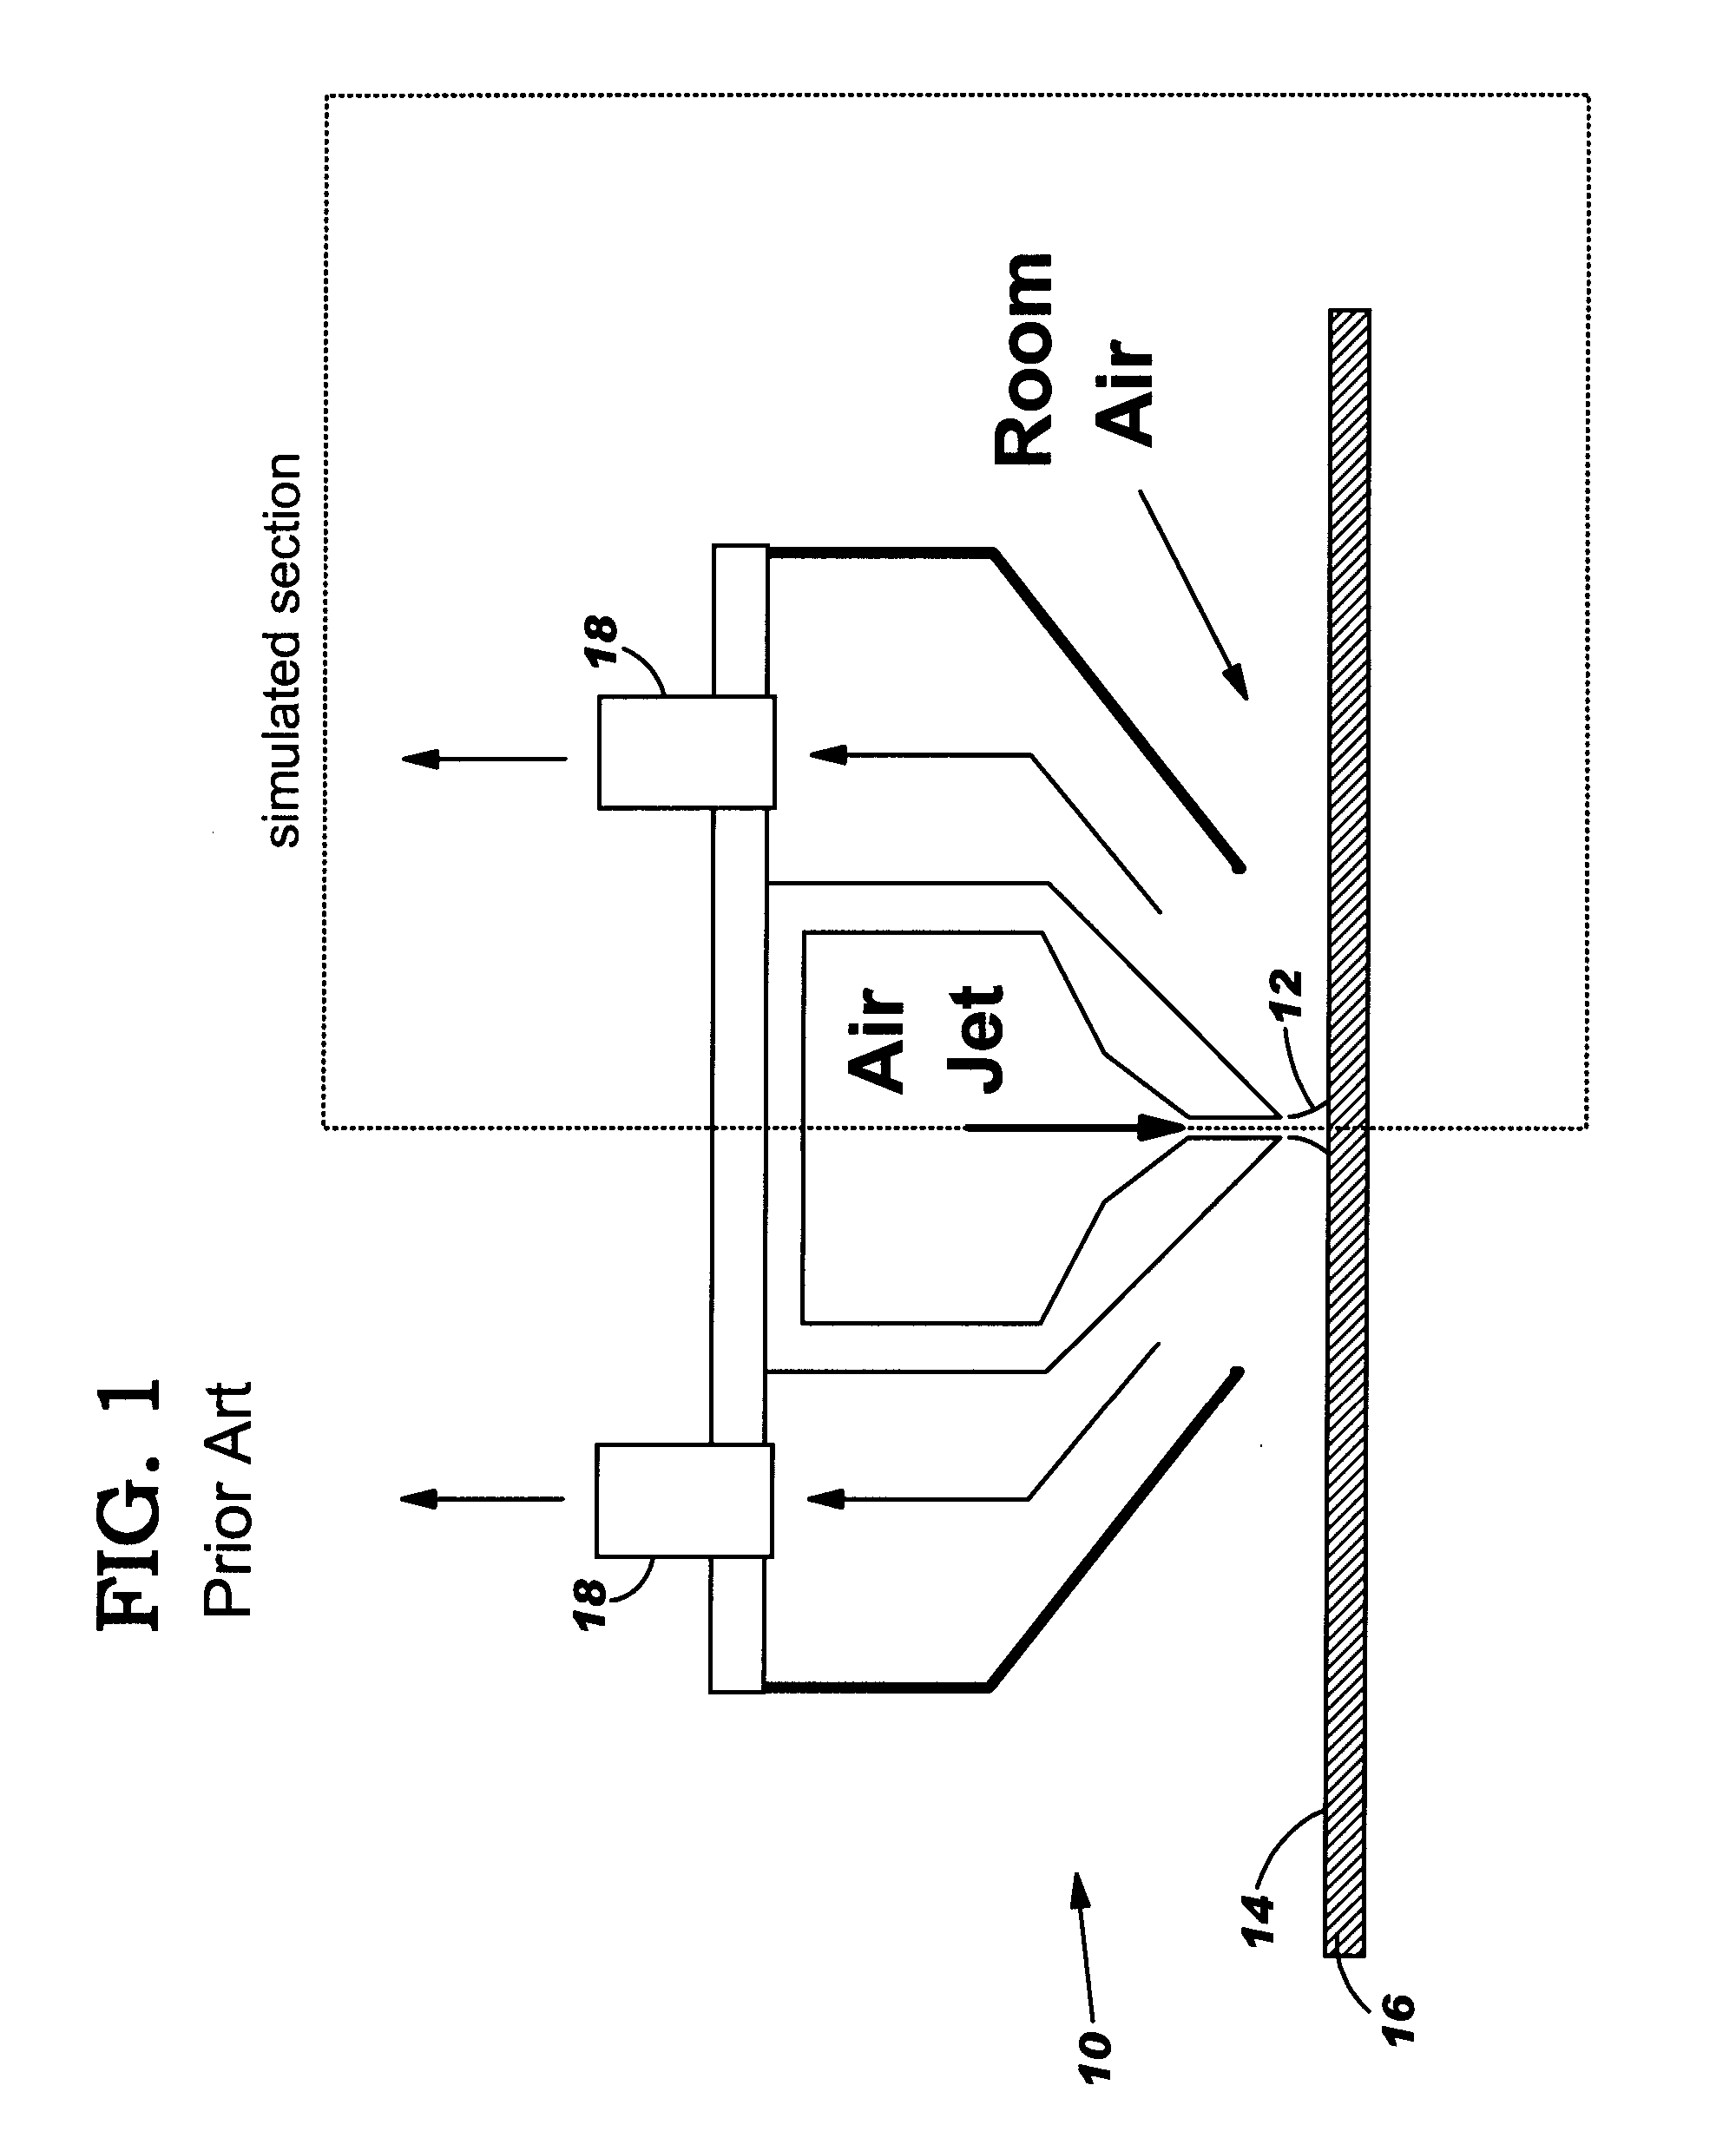 Non-contact fluid particle cleaner and method